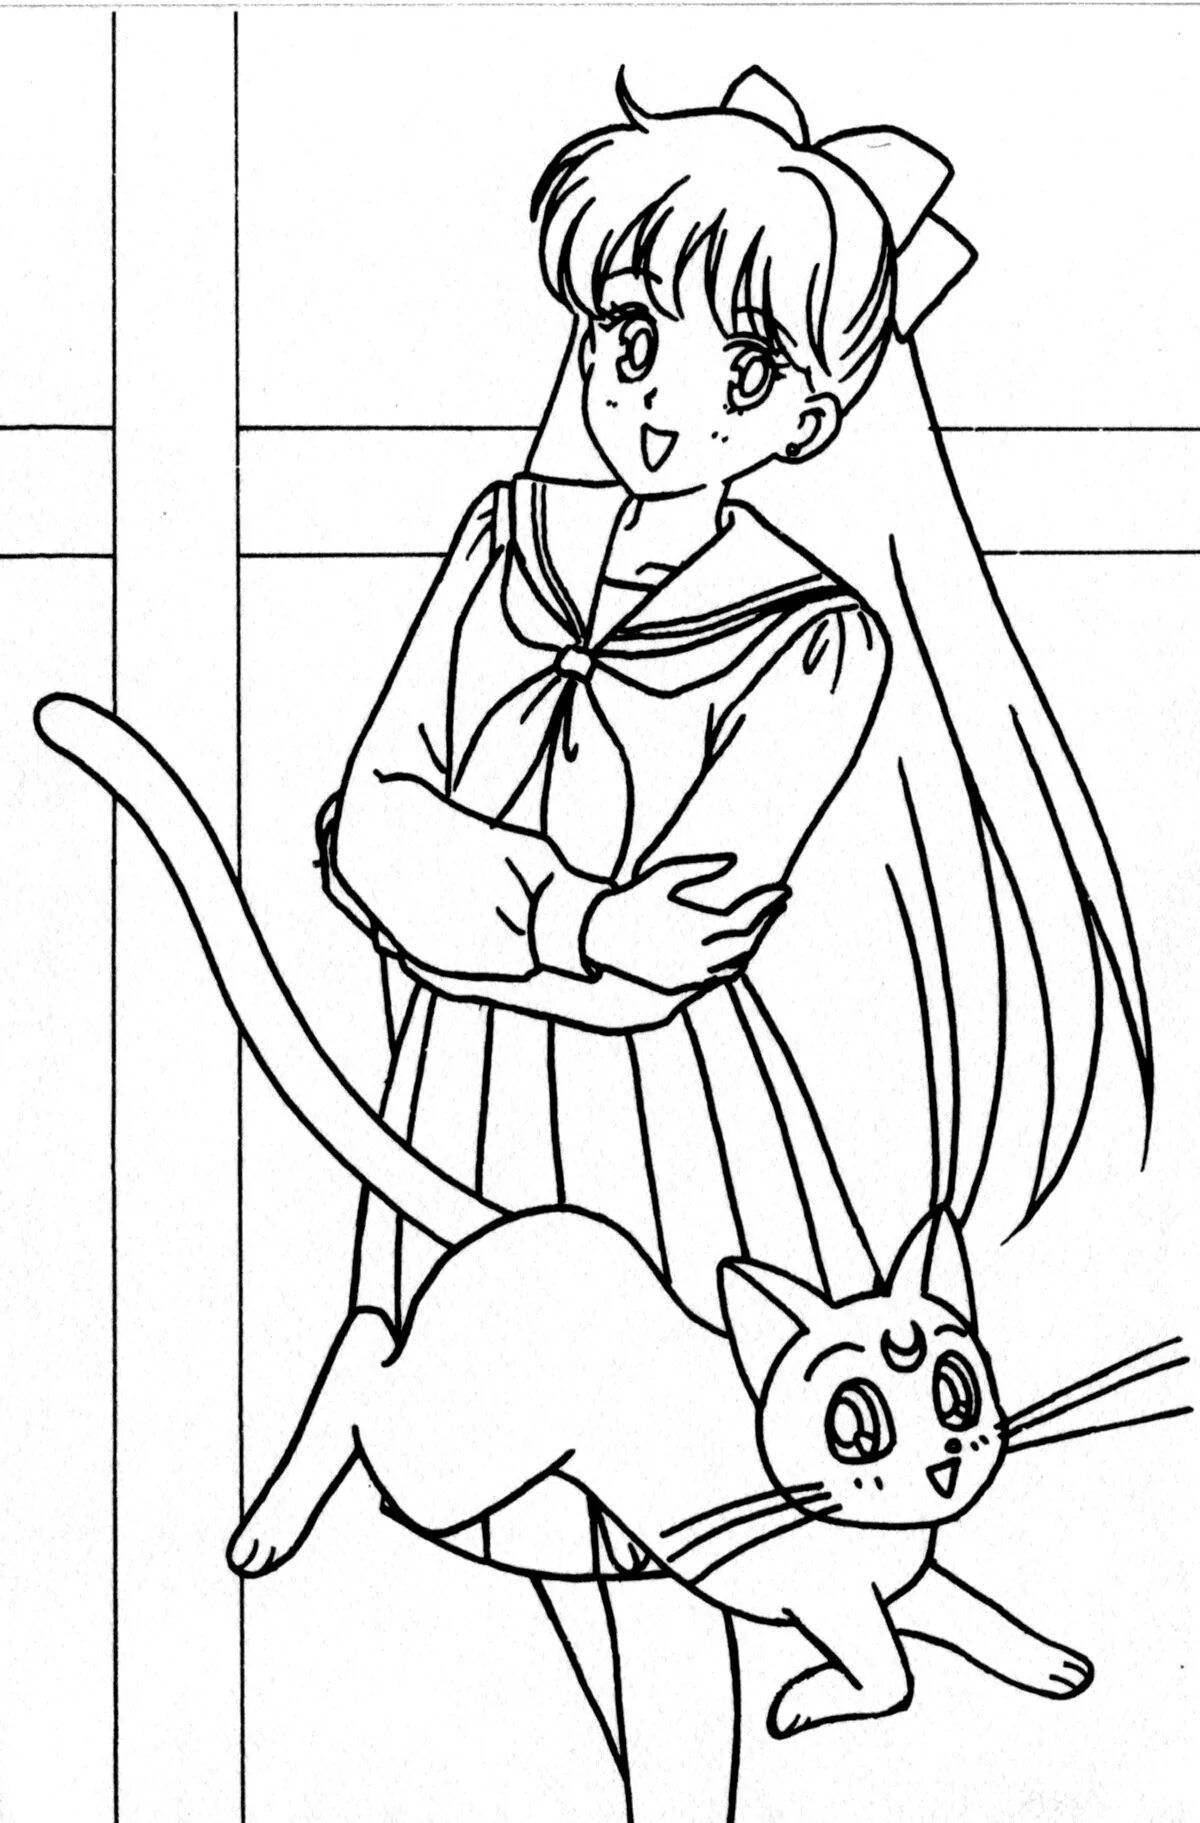 Stylish cat girl coloring book